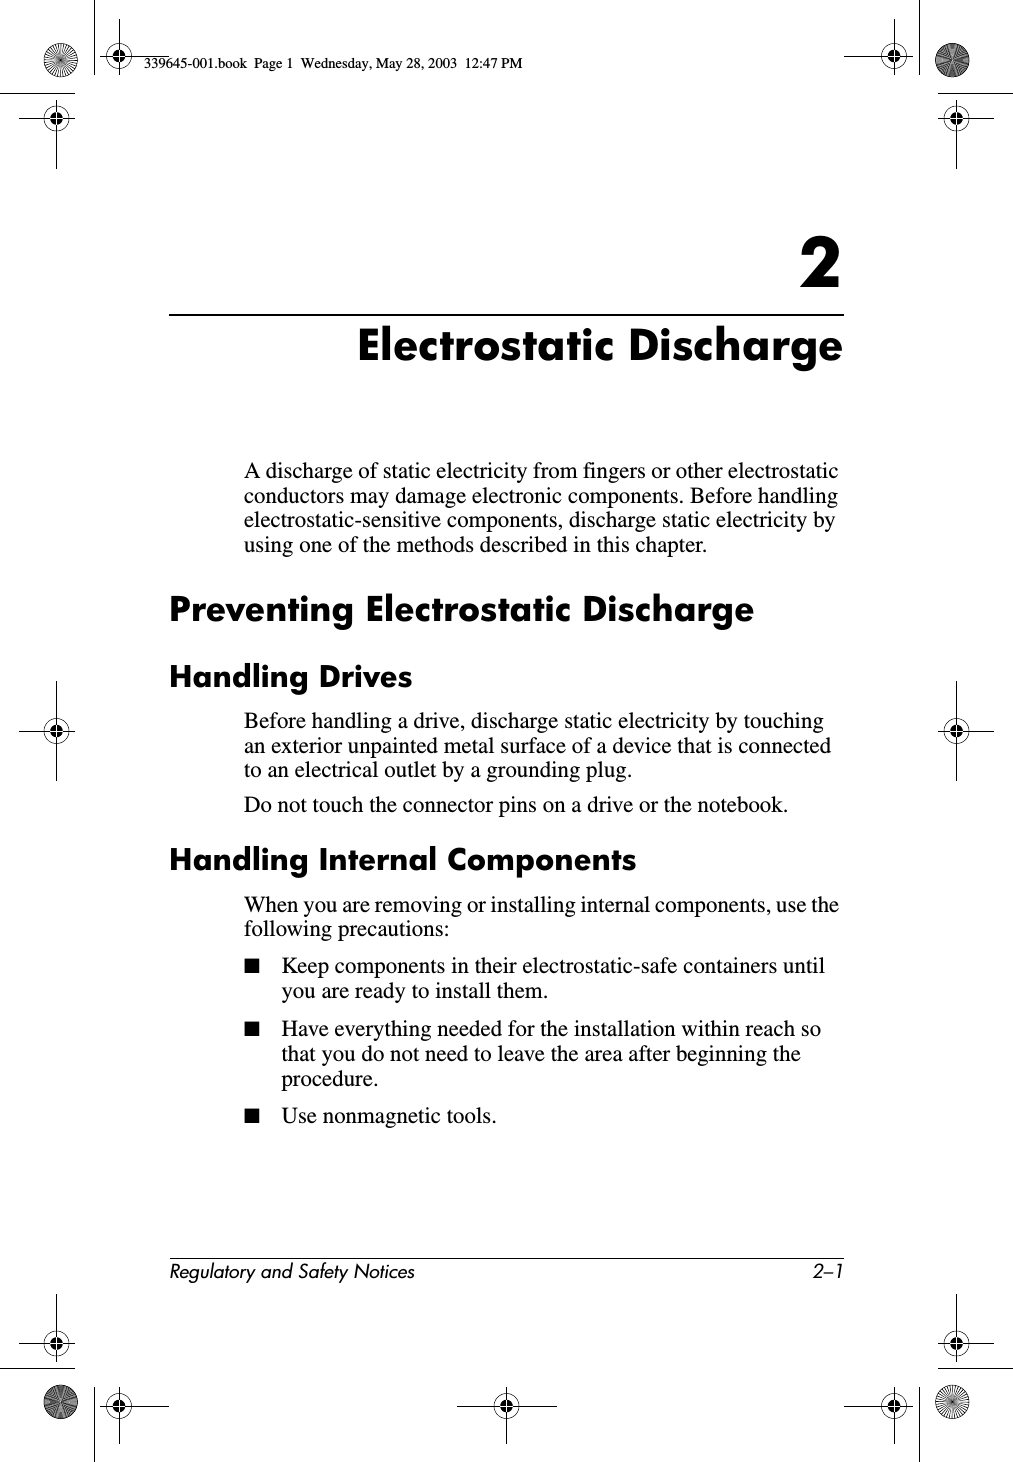 Regulatory and Safety Notices 2–12Electrostatic DischargeA discharge of static electricity from fingers or other electrostatic conductors may damage electronic components. Before handling electrostatic-sensitive components, discharge static electricity by using one of the methods described in this chapter.Preventing Electrostatic DischargeHandling DrivesBefore handling a drive, discharge static electricity by touching an exterior unpainted metal surface of a device that is connected to an electrical outlet by a grounding plug.Do not touch the connector pins on a drive or the notebook.Handling Internal ComponentsWhen you are removing or installing internal components, use the following precautions:■Keep components in their electrostatic-safe containers until you are ready to install them.■Have everything needed for the installation within reach so that you do not need to leave the area after beginning the procedure.■Use nonmagnetic tools.339645-001.book  Page 1  Wednesday, May 28, 2003  12:47 PM